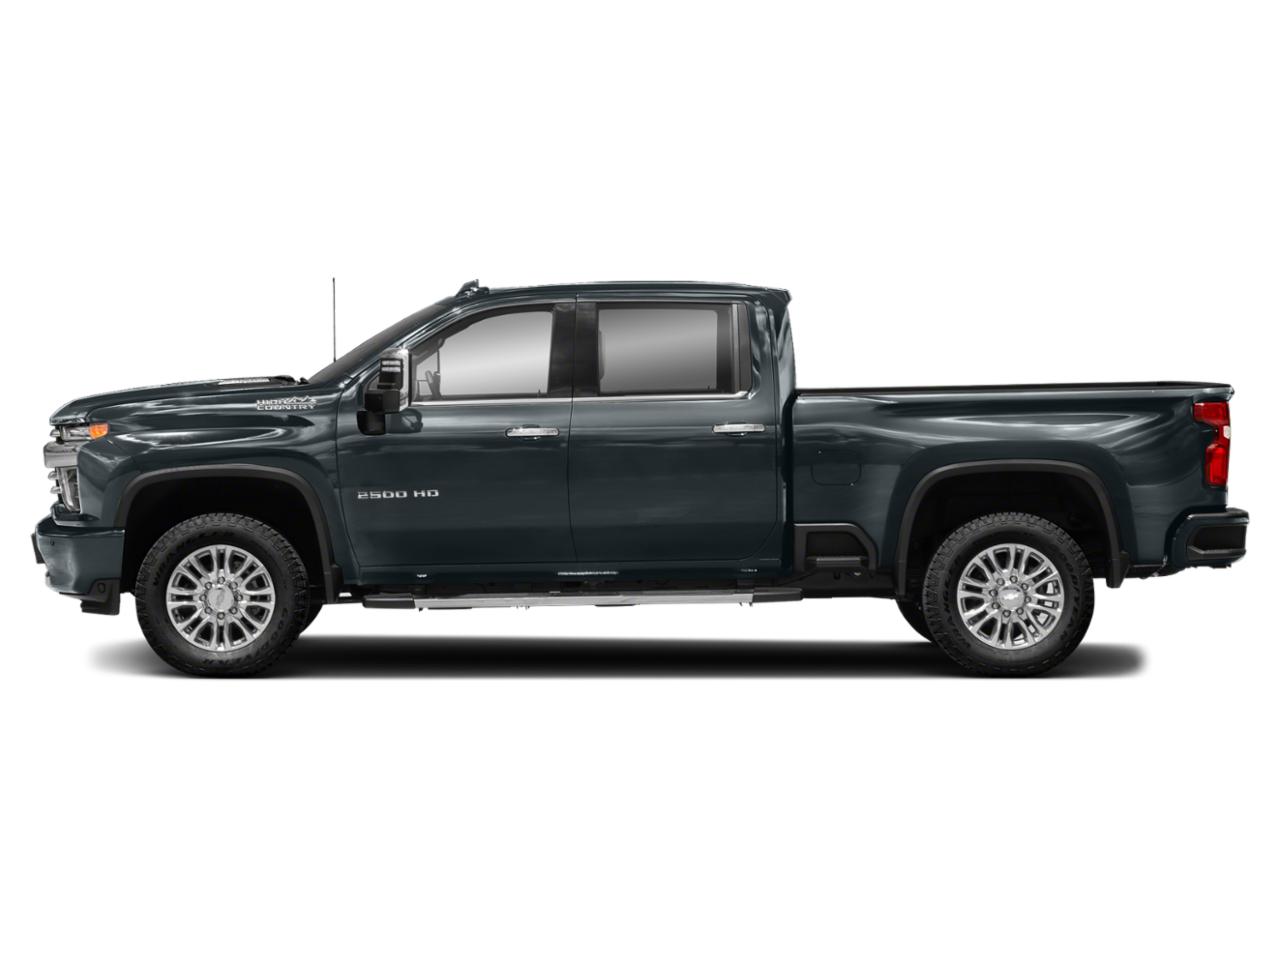 Used 2020 Chevrolet Silverado 2500HD High Country with VIN 1GC1YREY6LF253504 for sale in Pascagoula, MS